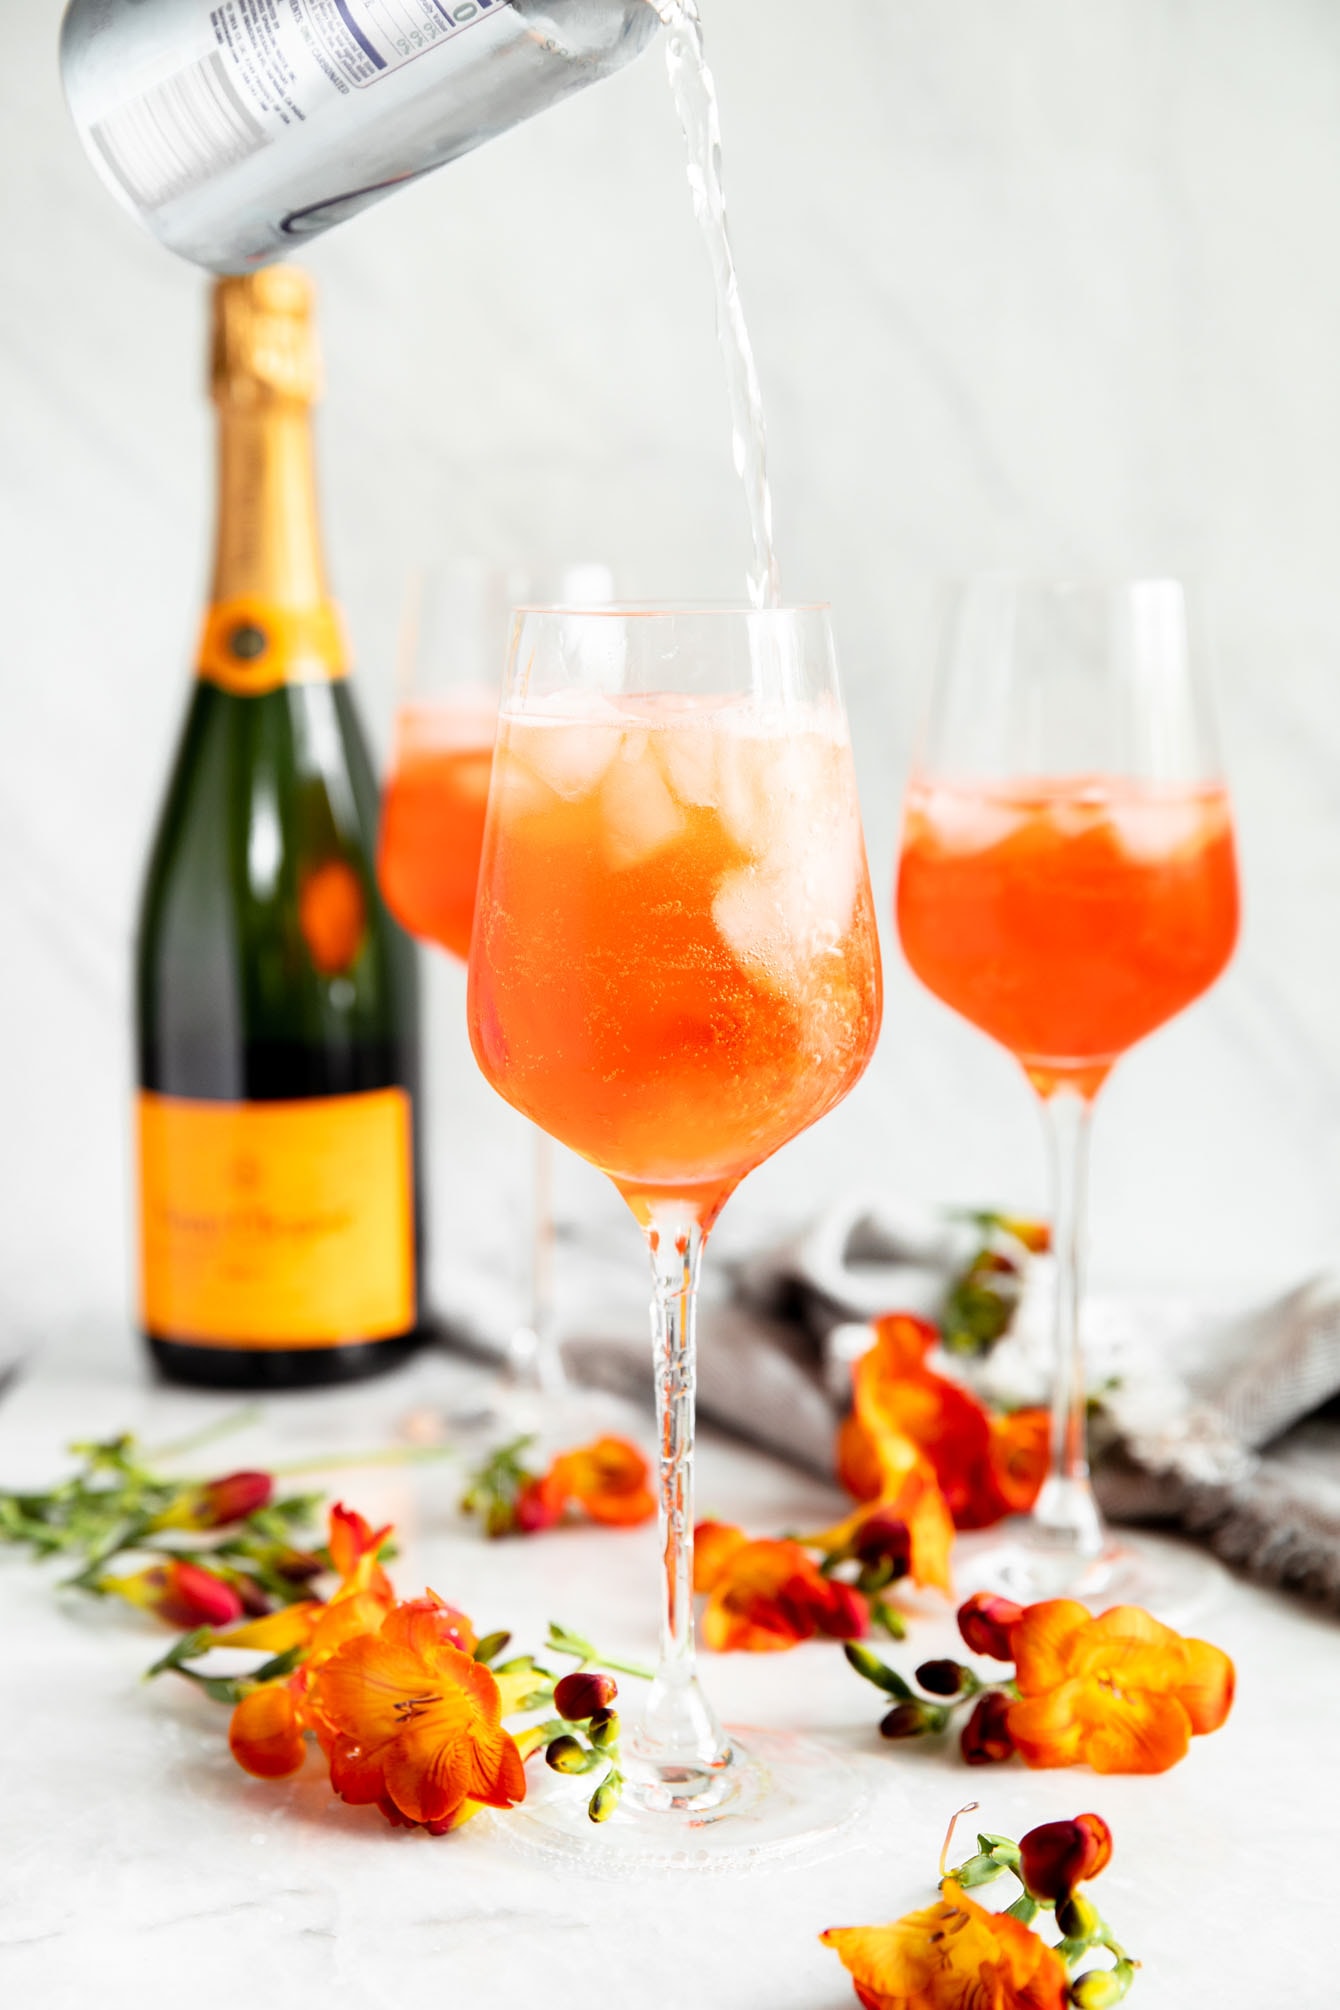 Summer cocktail season is here! We're celebrating with this bubbly and refreshing easy aperol spritz recipe. Perfect for a hot night. Or day :)